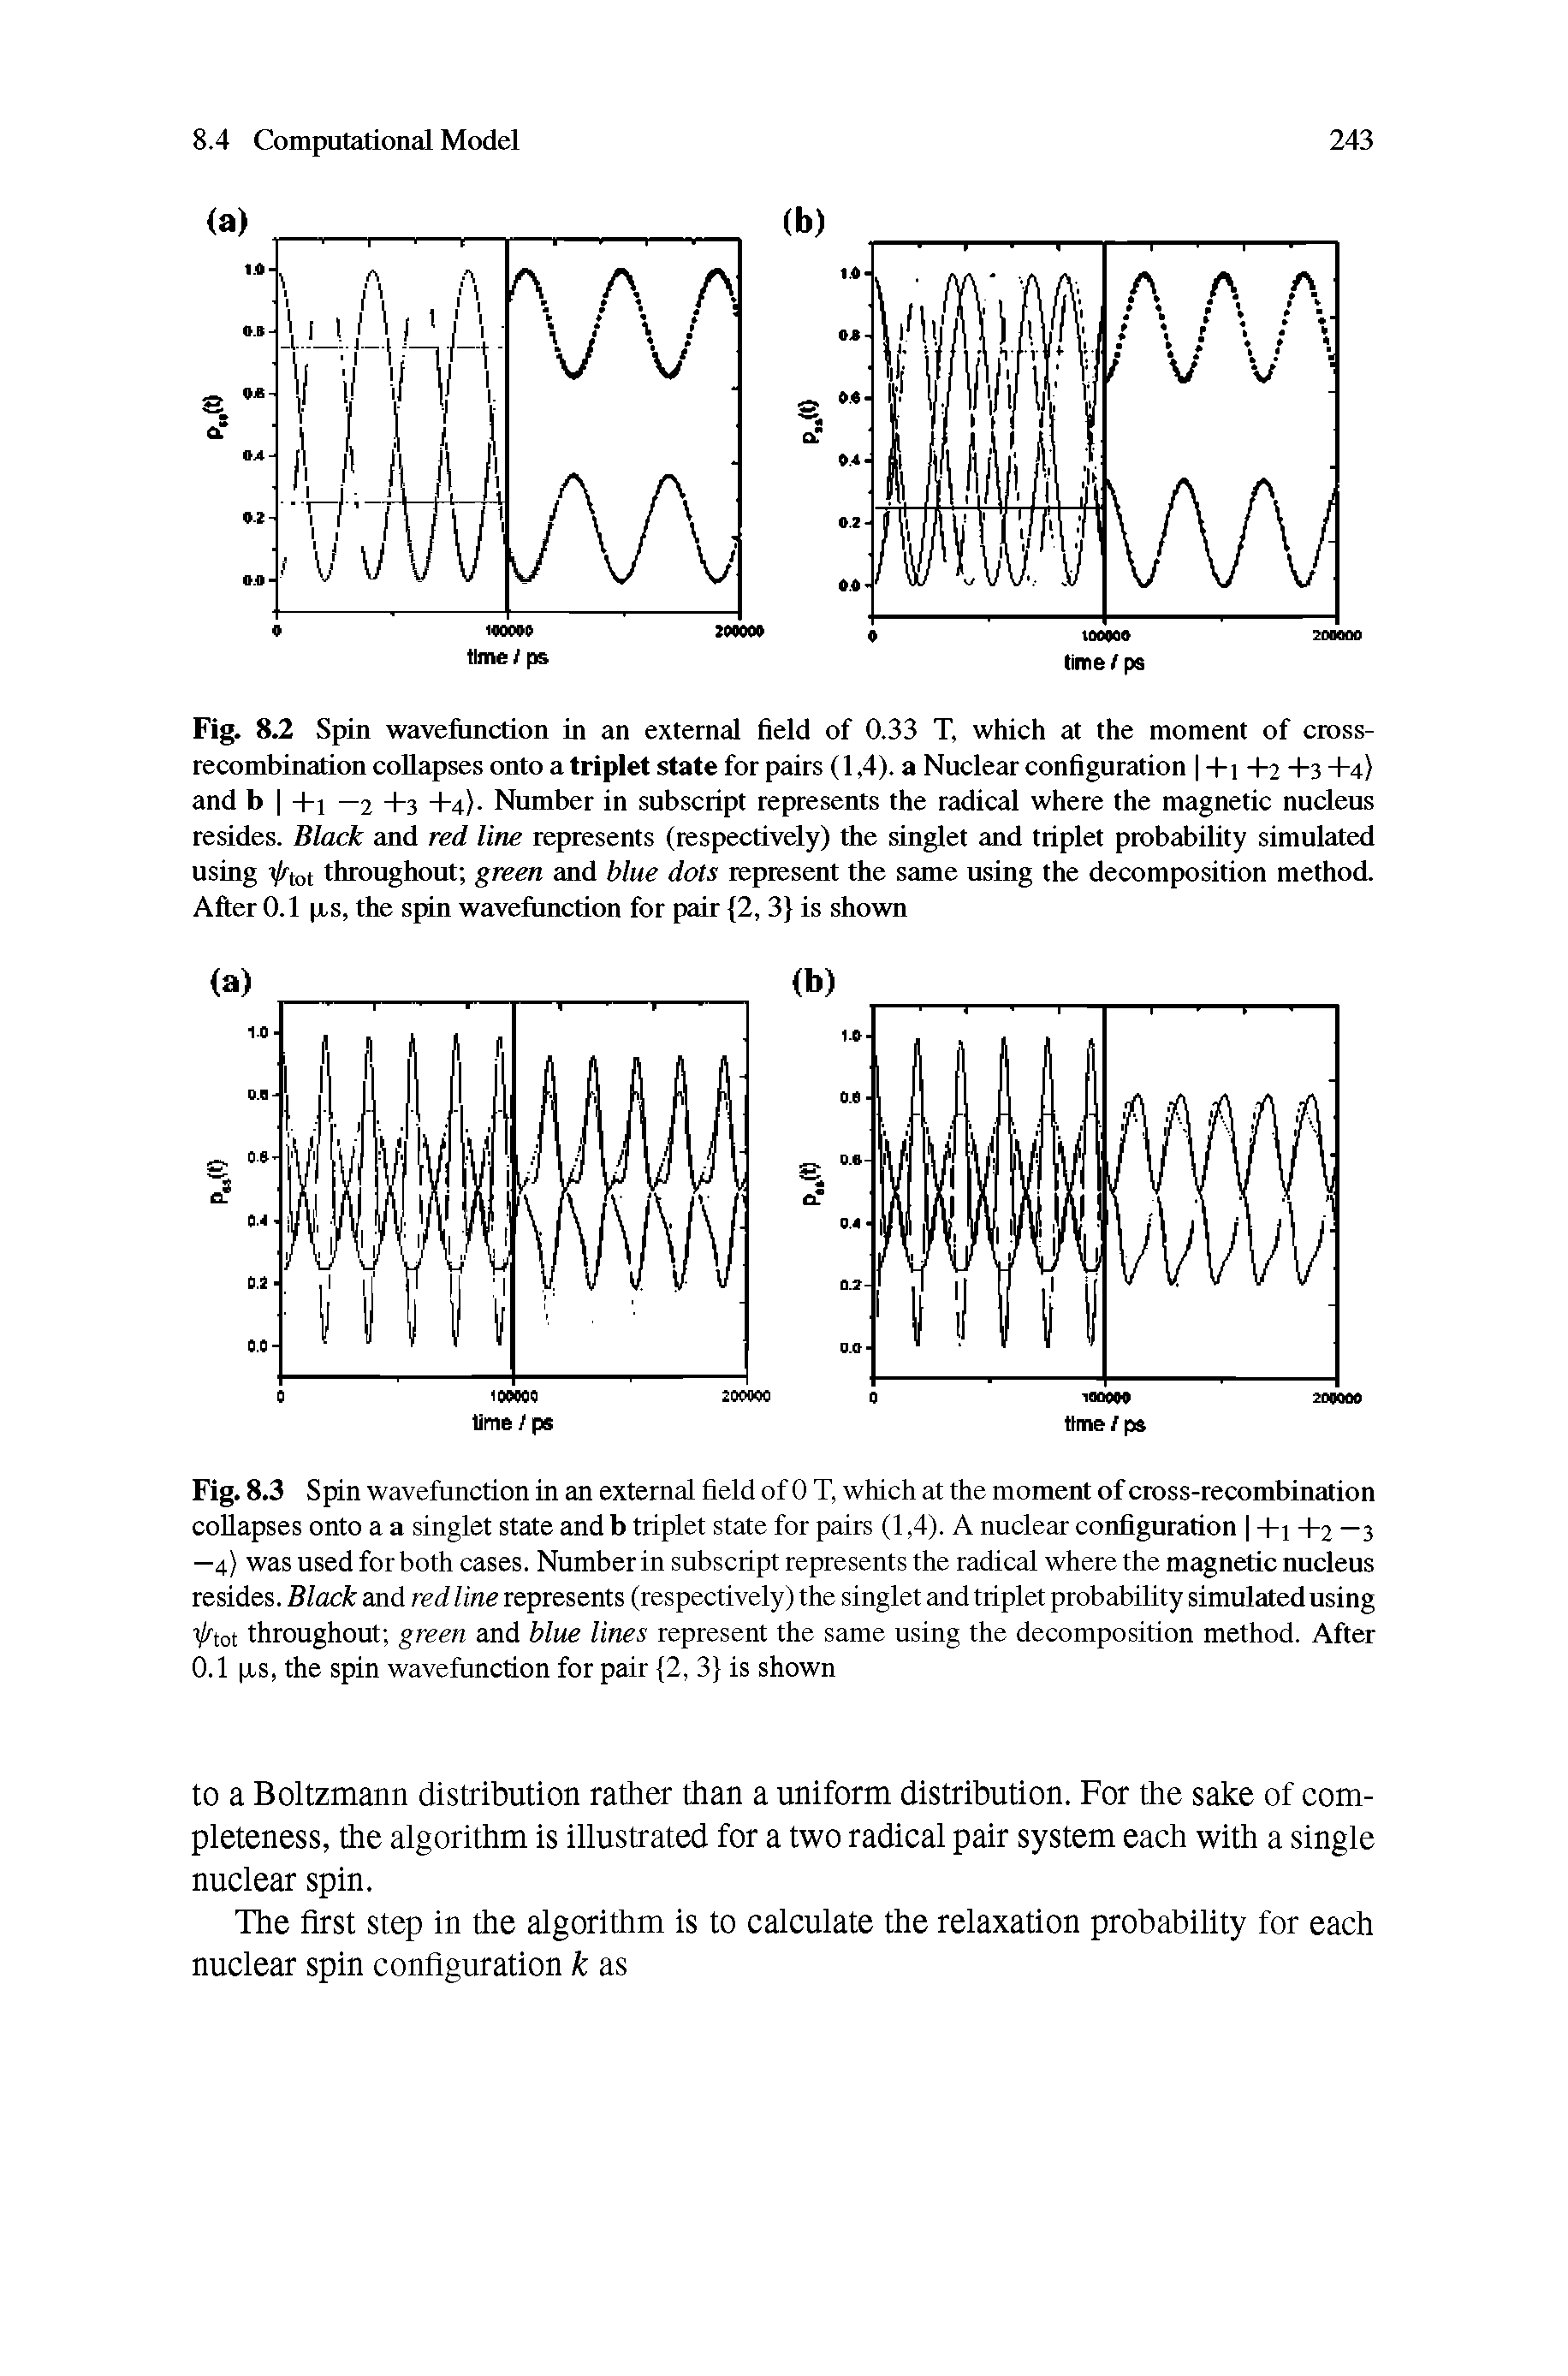 Fig. 8.2 Spin wavefunction in an external field of 0.33 T, which at the moment of crossrecombination collapses onto a triplet state for pairs (1,4). a Nuclear configuration 14-1 4-2 +3 +4> and b I 4-1 —2 4-3 4-4>. Number in subscript represents the radical where the magnetic nucleus resides. Black and red line represents (respectively) the singlet and triplet probability simulated using i/rtot throughout green and blue dots represent the same using the decomposition method. After 0.1 p.s, the spin wavefunction for pair 2, 3 is shown...